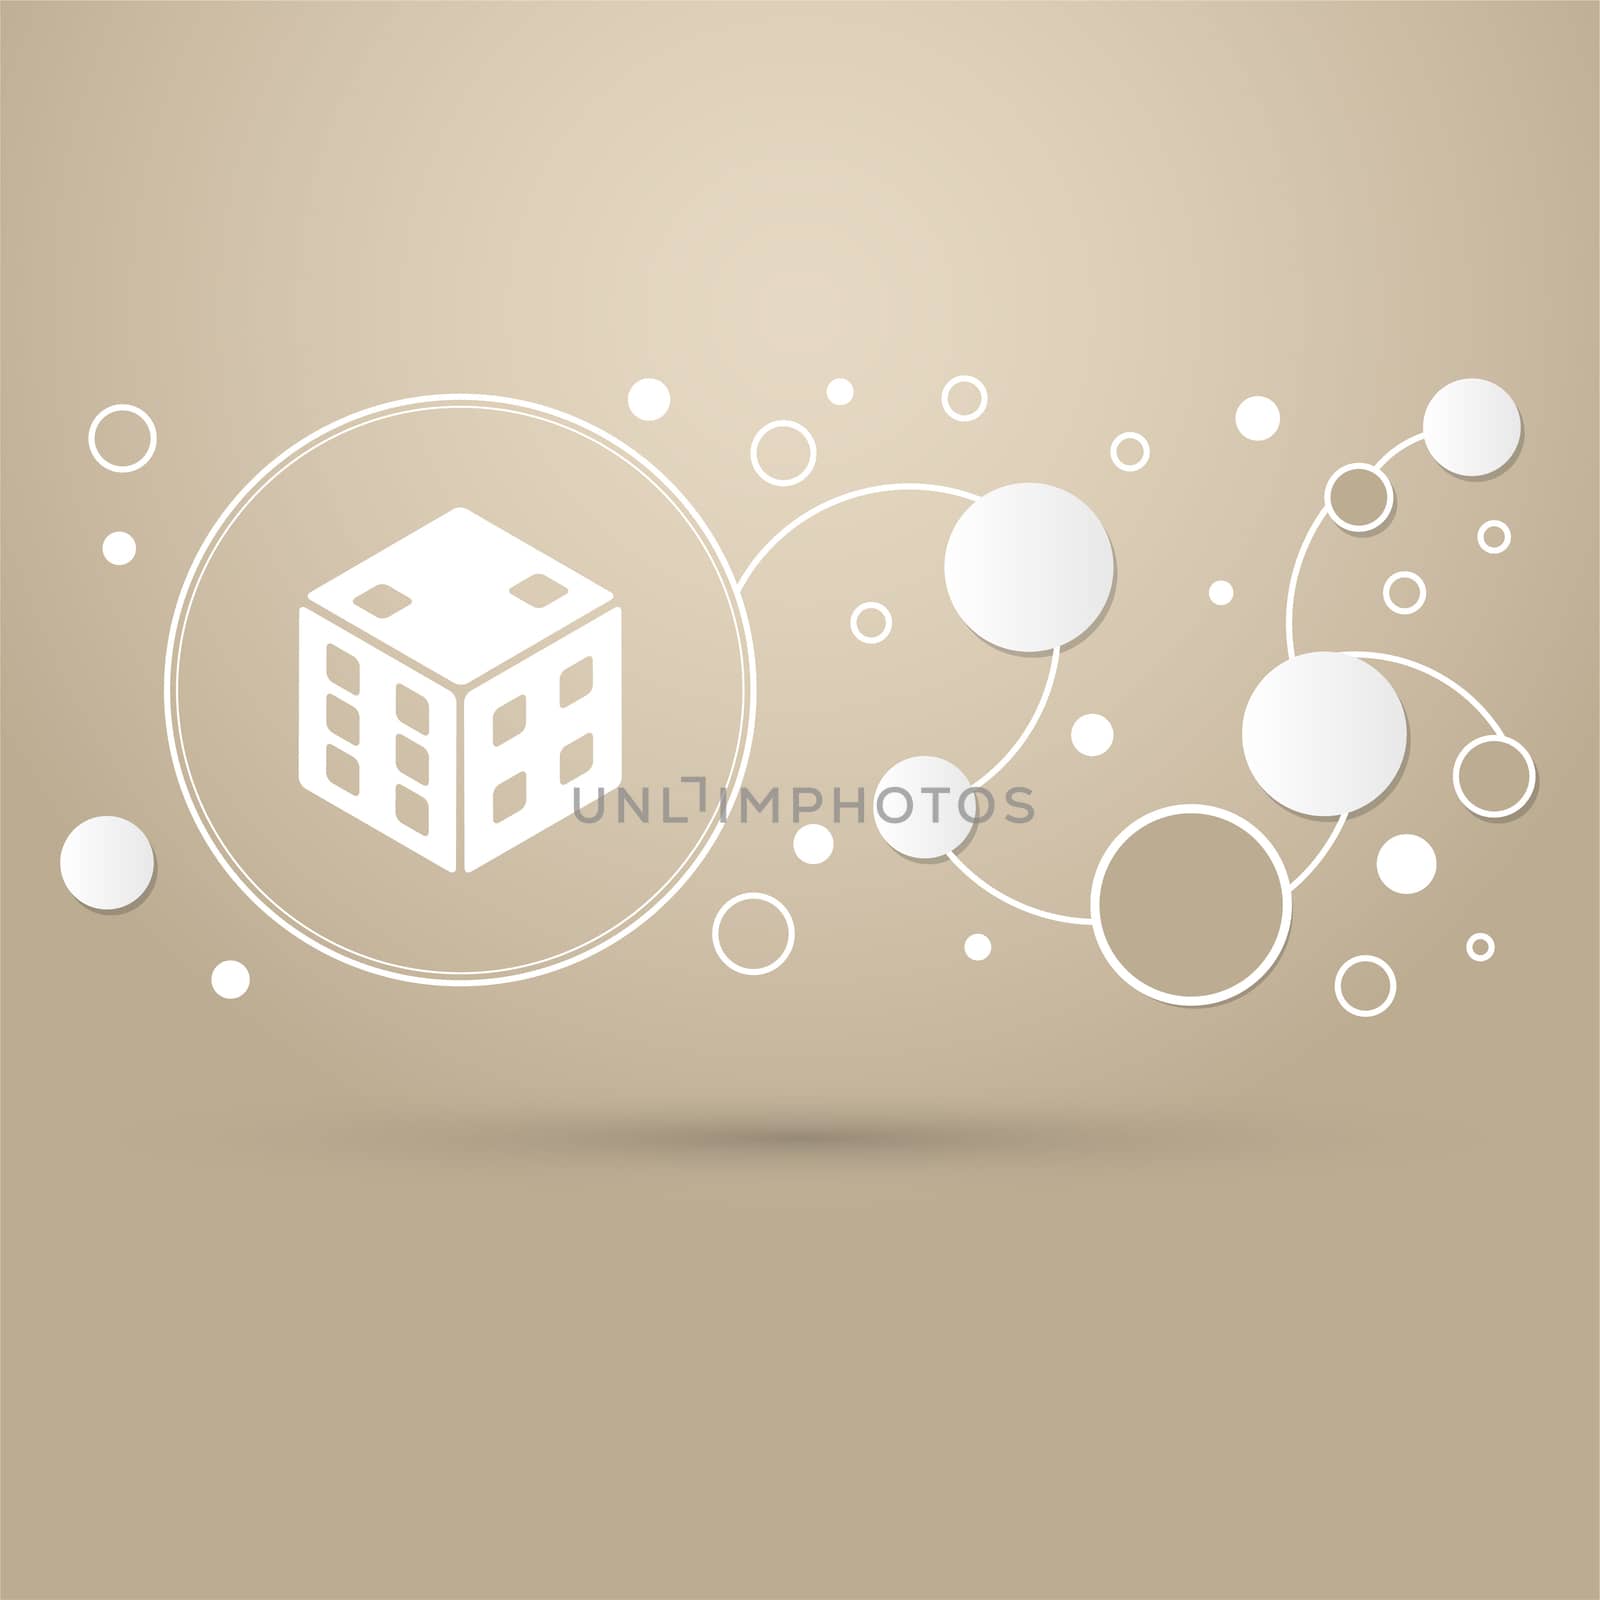 game cube icon on a brown background with elegant style and modern design infographic.  by Adamchuk